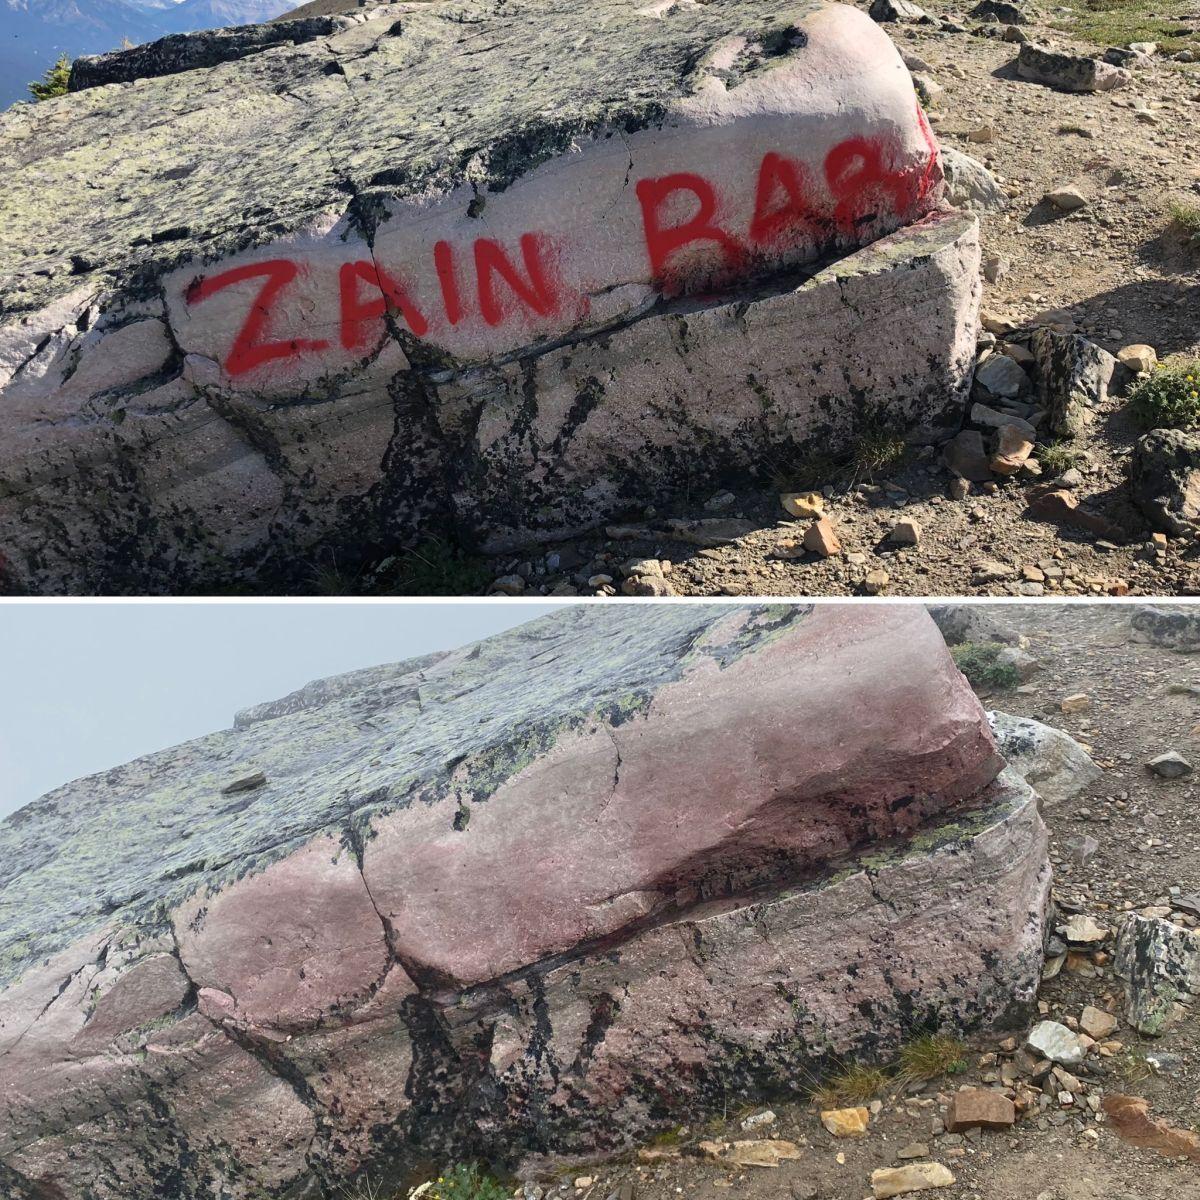 Before and after the graffiti removal on rocks along a trail in Jasper National Park.